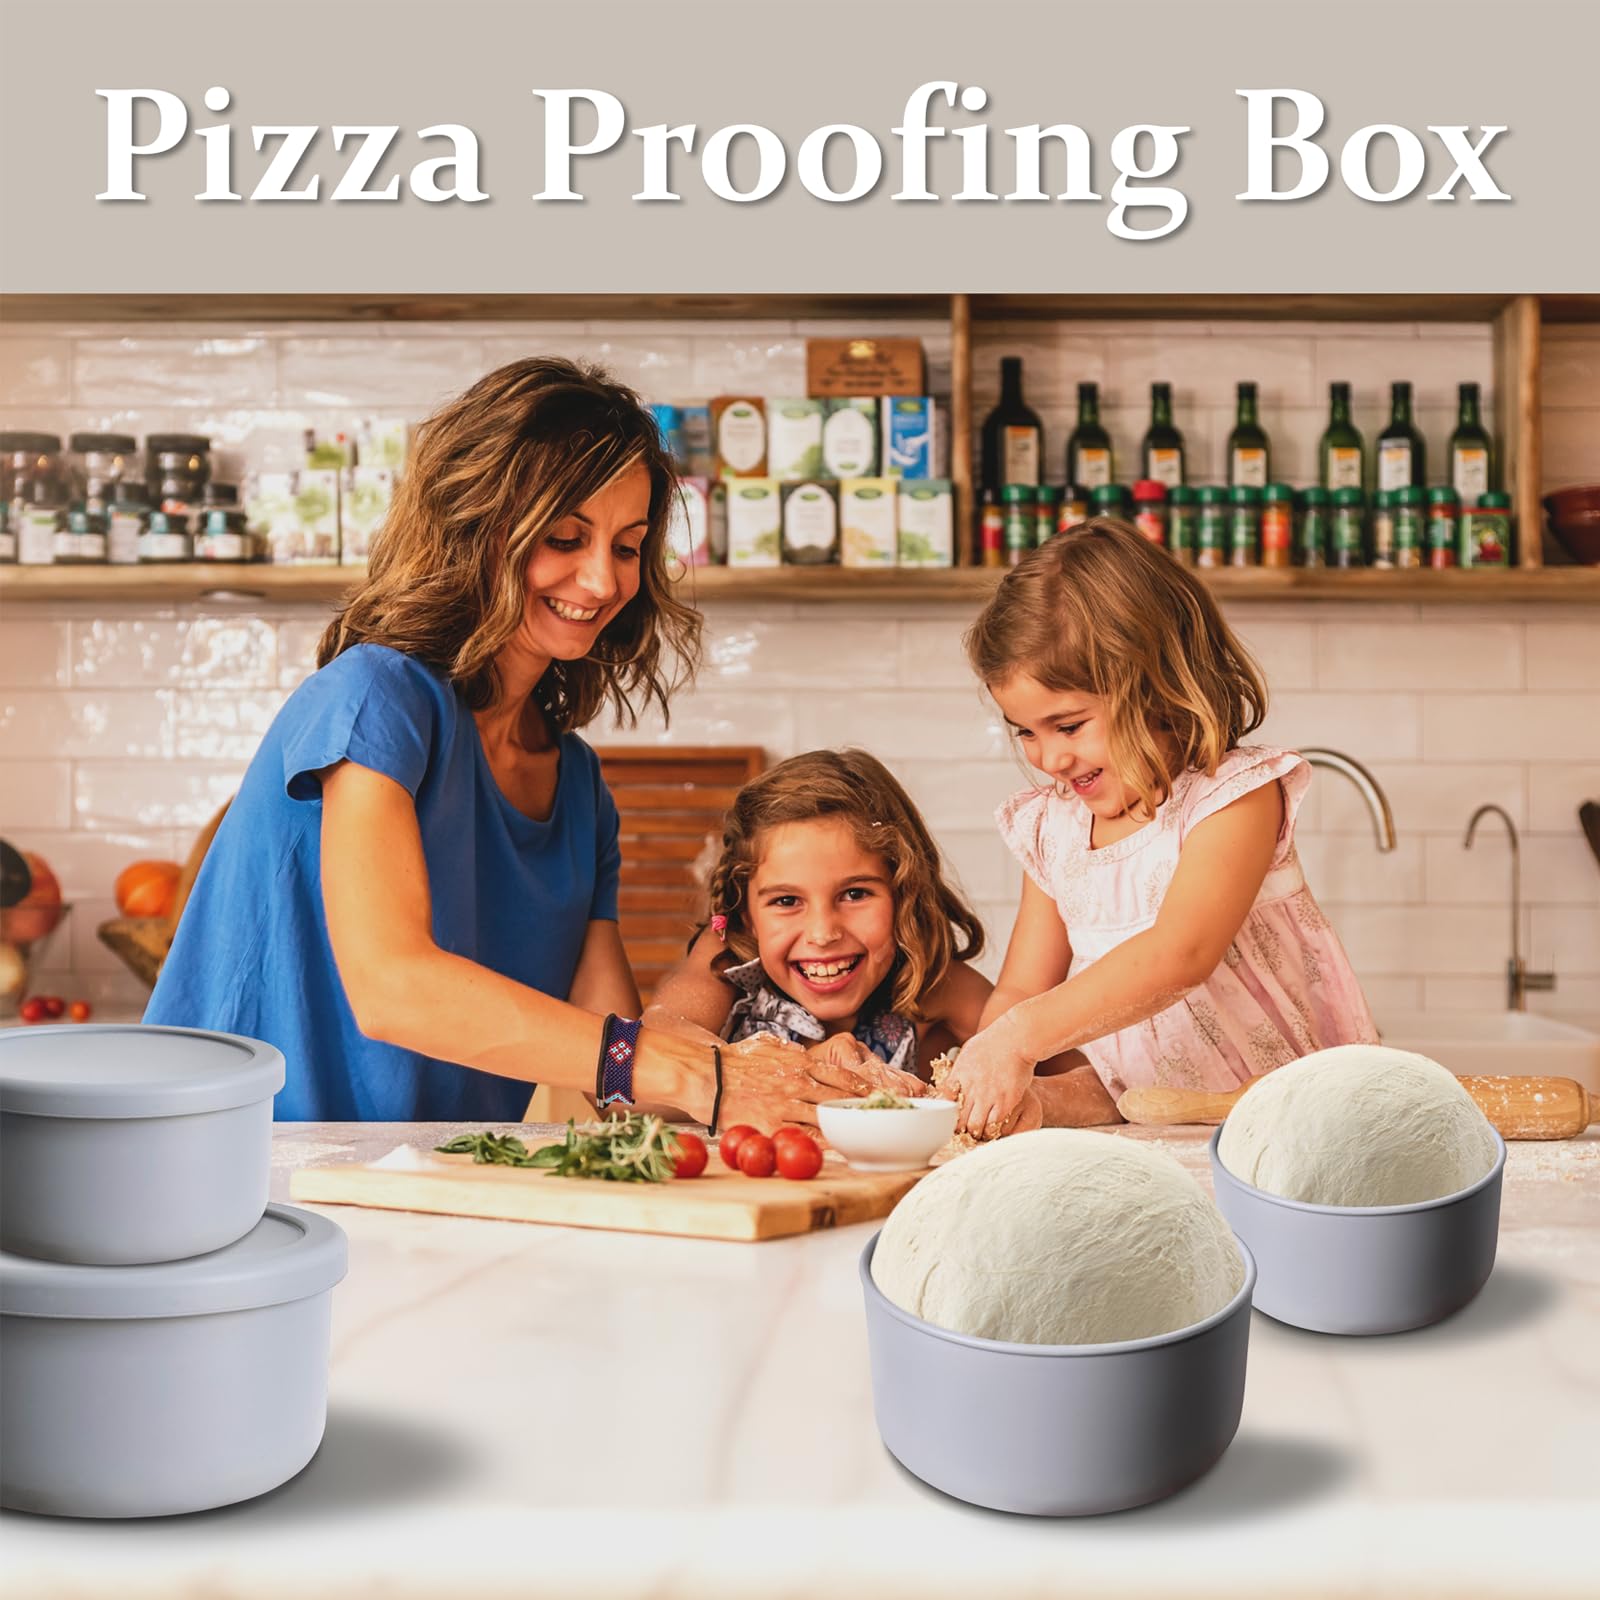 Gberlczz Large Pizza Dough Container 2PCS Dough Proofing Box | 1300ml/700ml Stackable Silicone Pizza Dough Proofing Box -Pizza Proofing Container with Lids